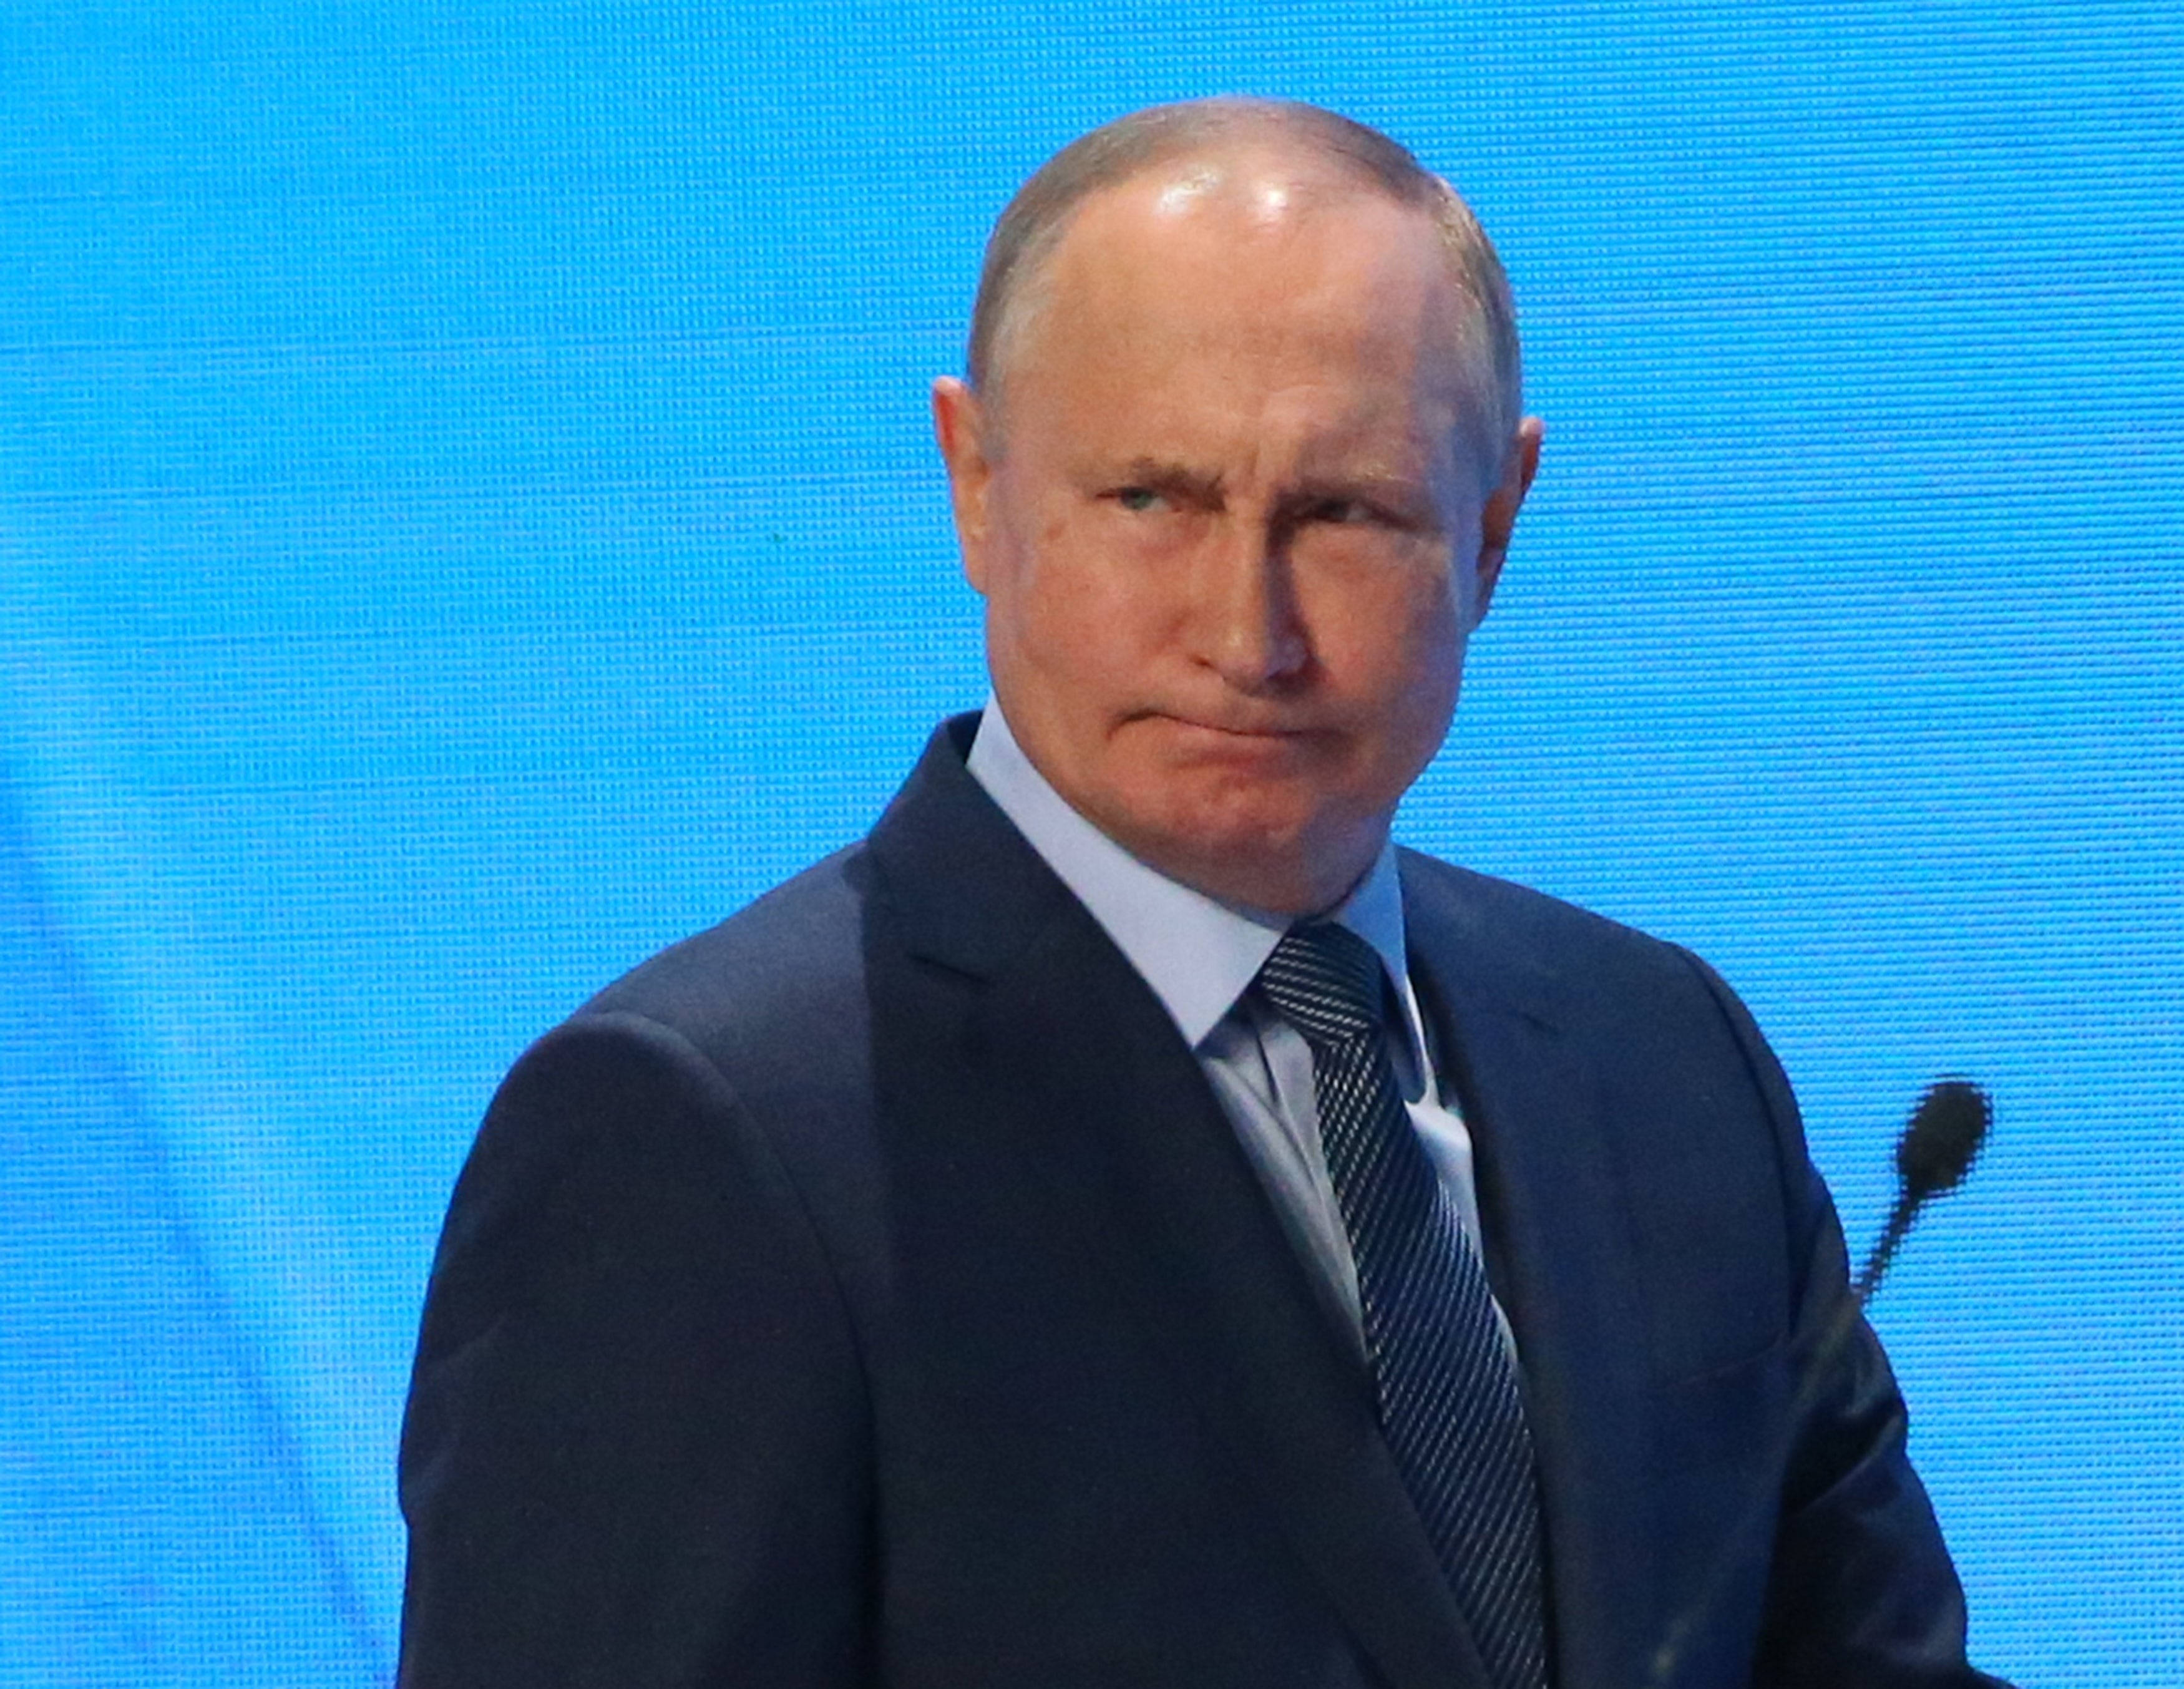 Putin isn’t coming to Glasgow, but has also recently pulled out of other summits